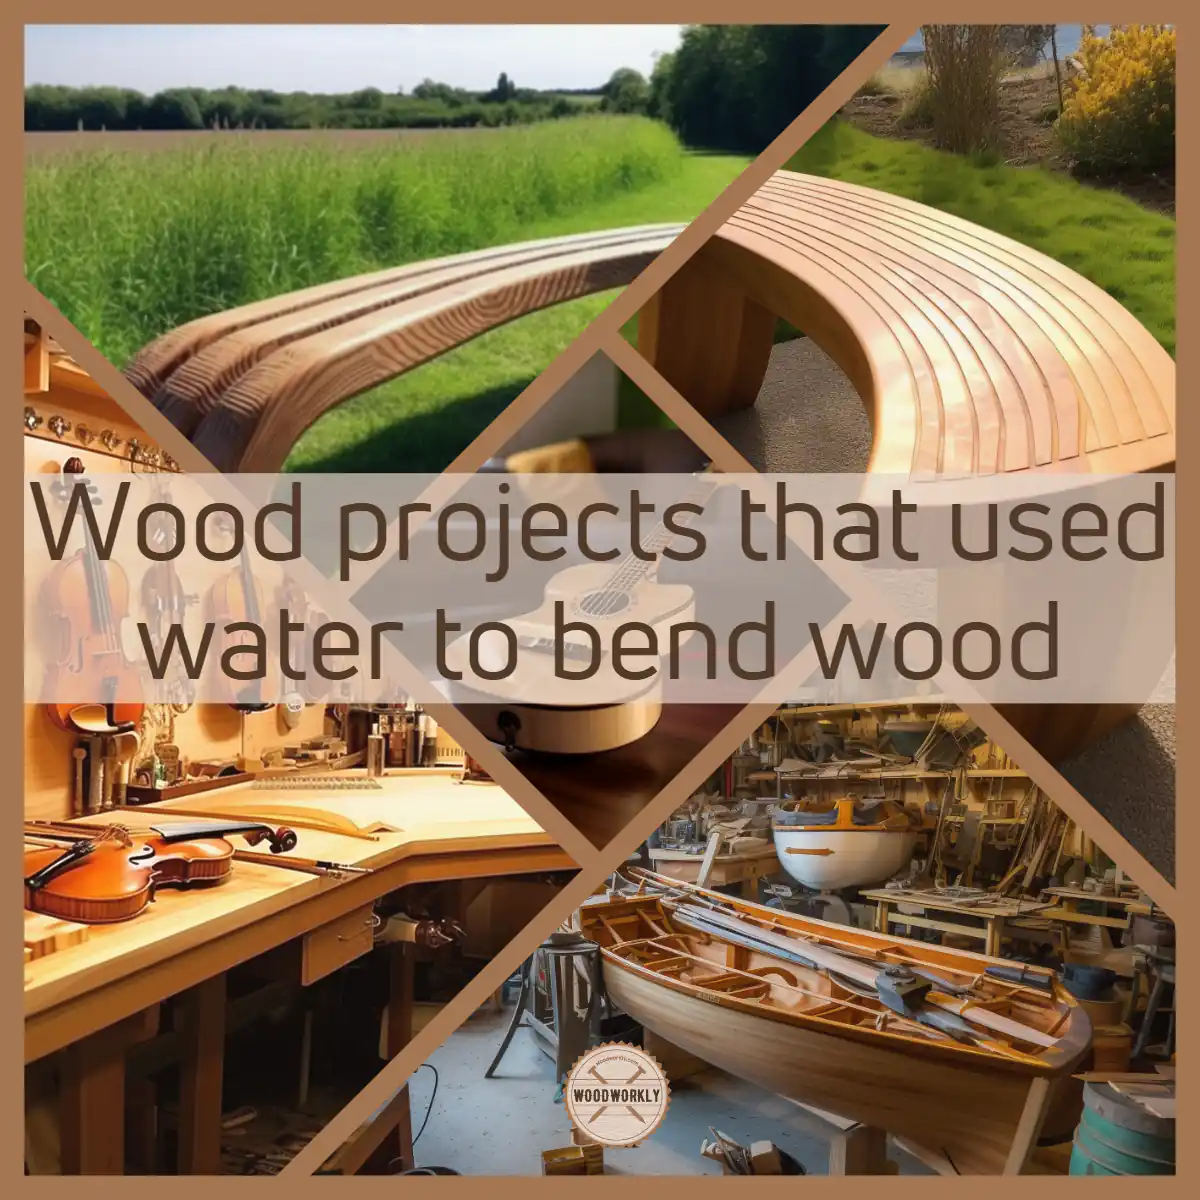 Wood projects that used water to bend wood